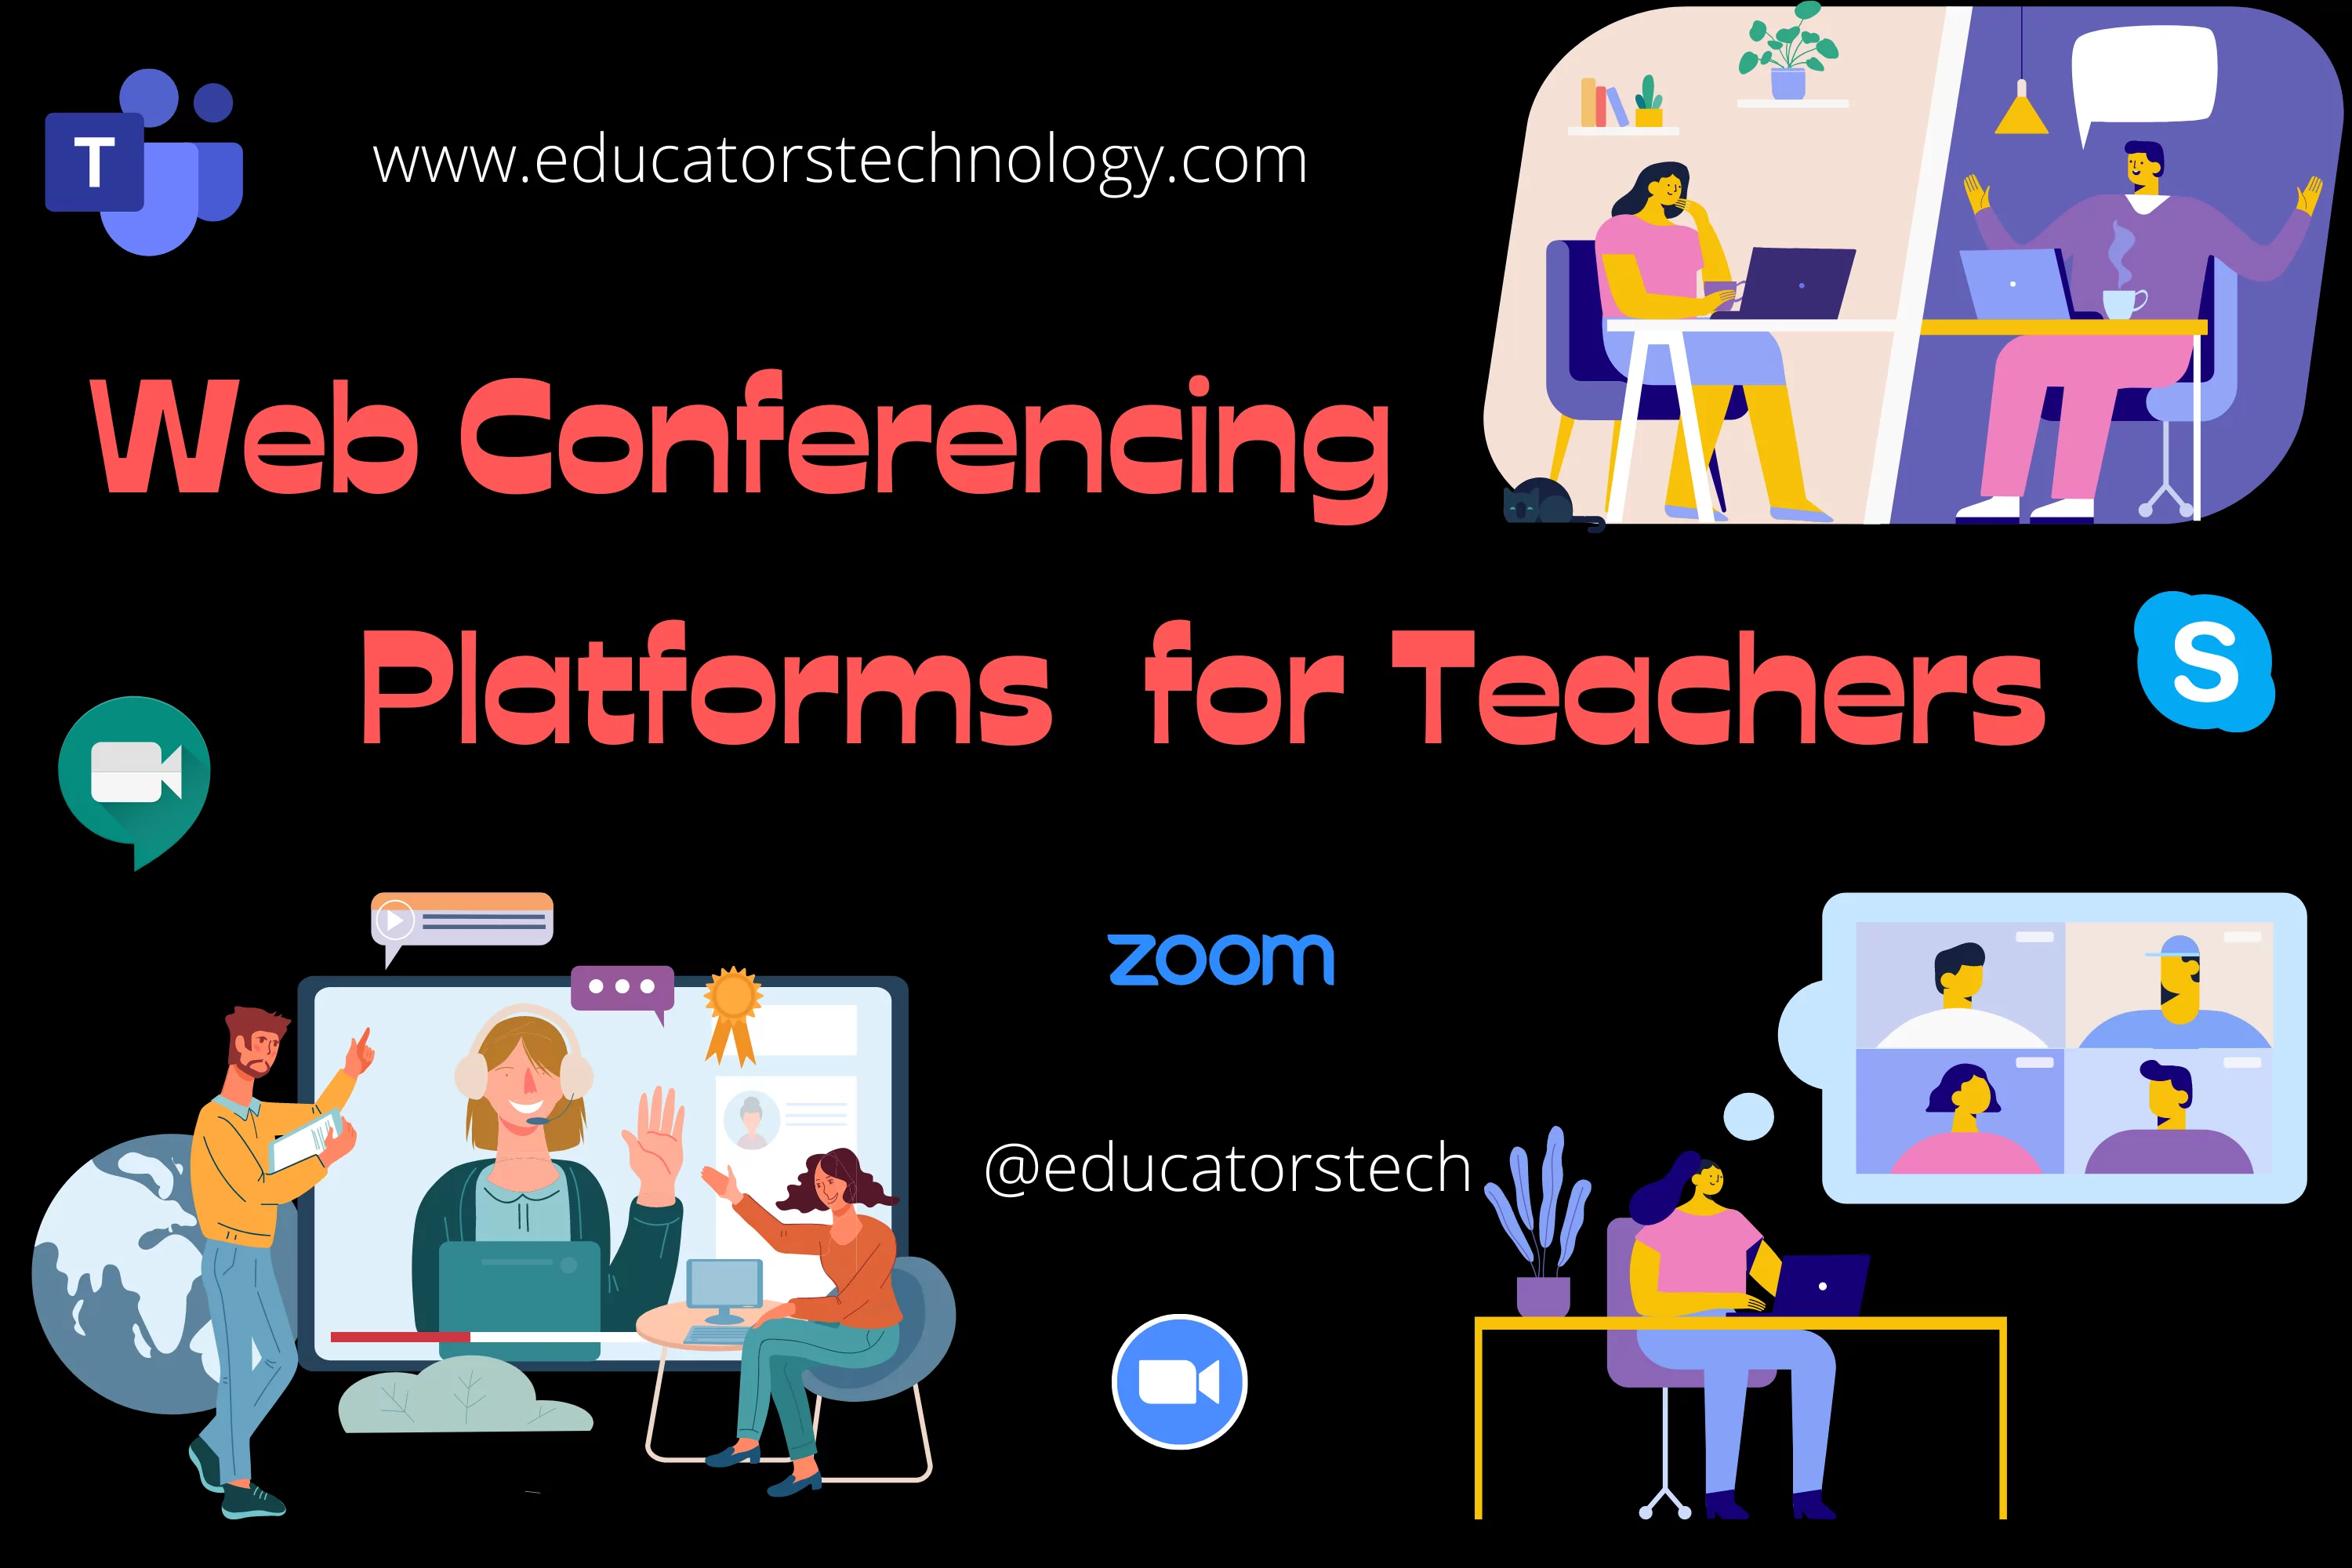 Web Conferencing Tools for teachers